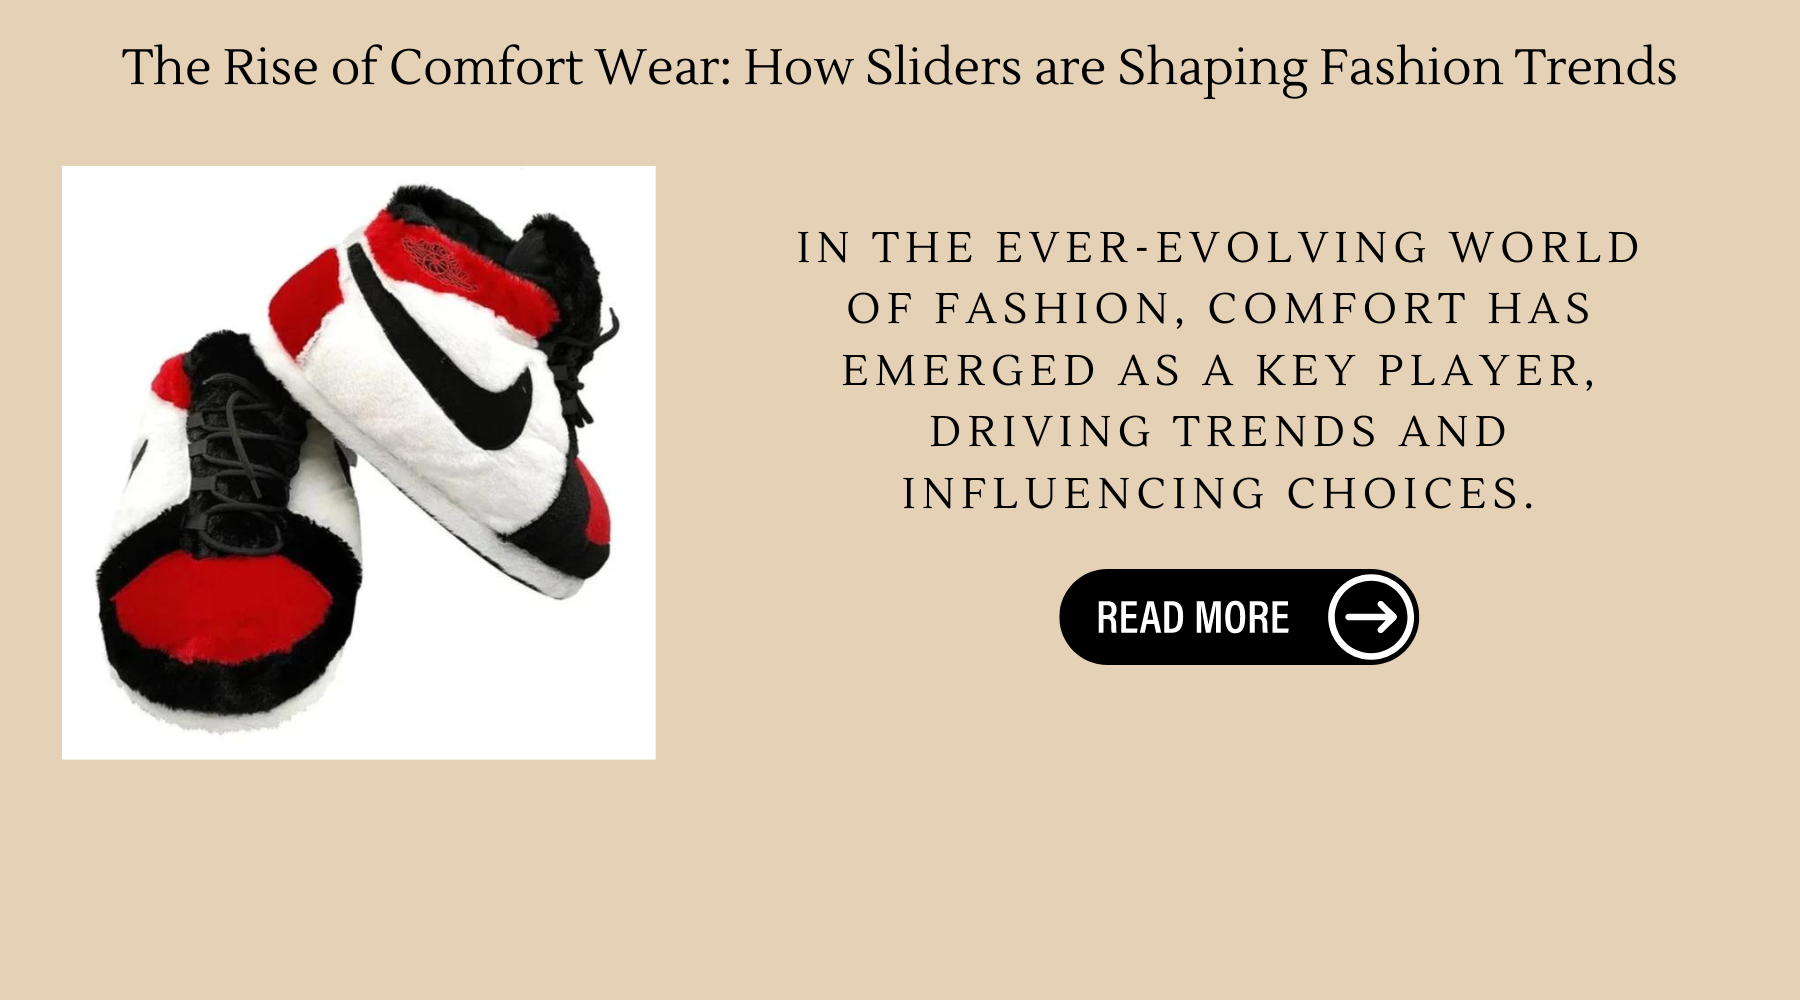 The Rise of Comfort Wear: How Sliders are Shaping Fashion Trends